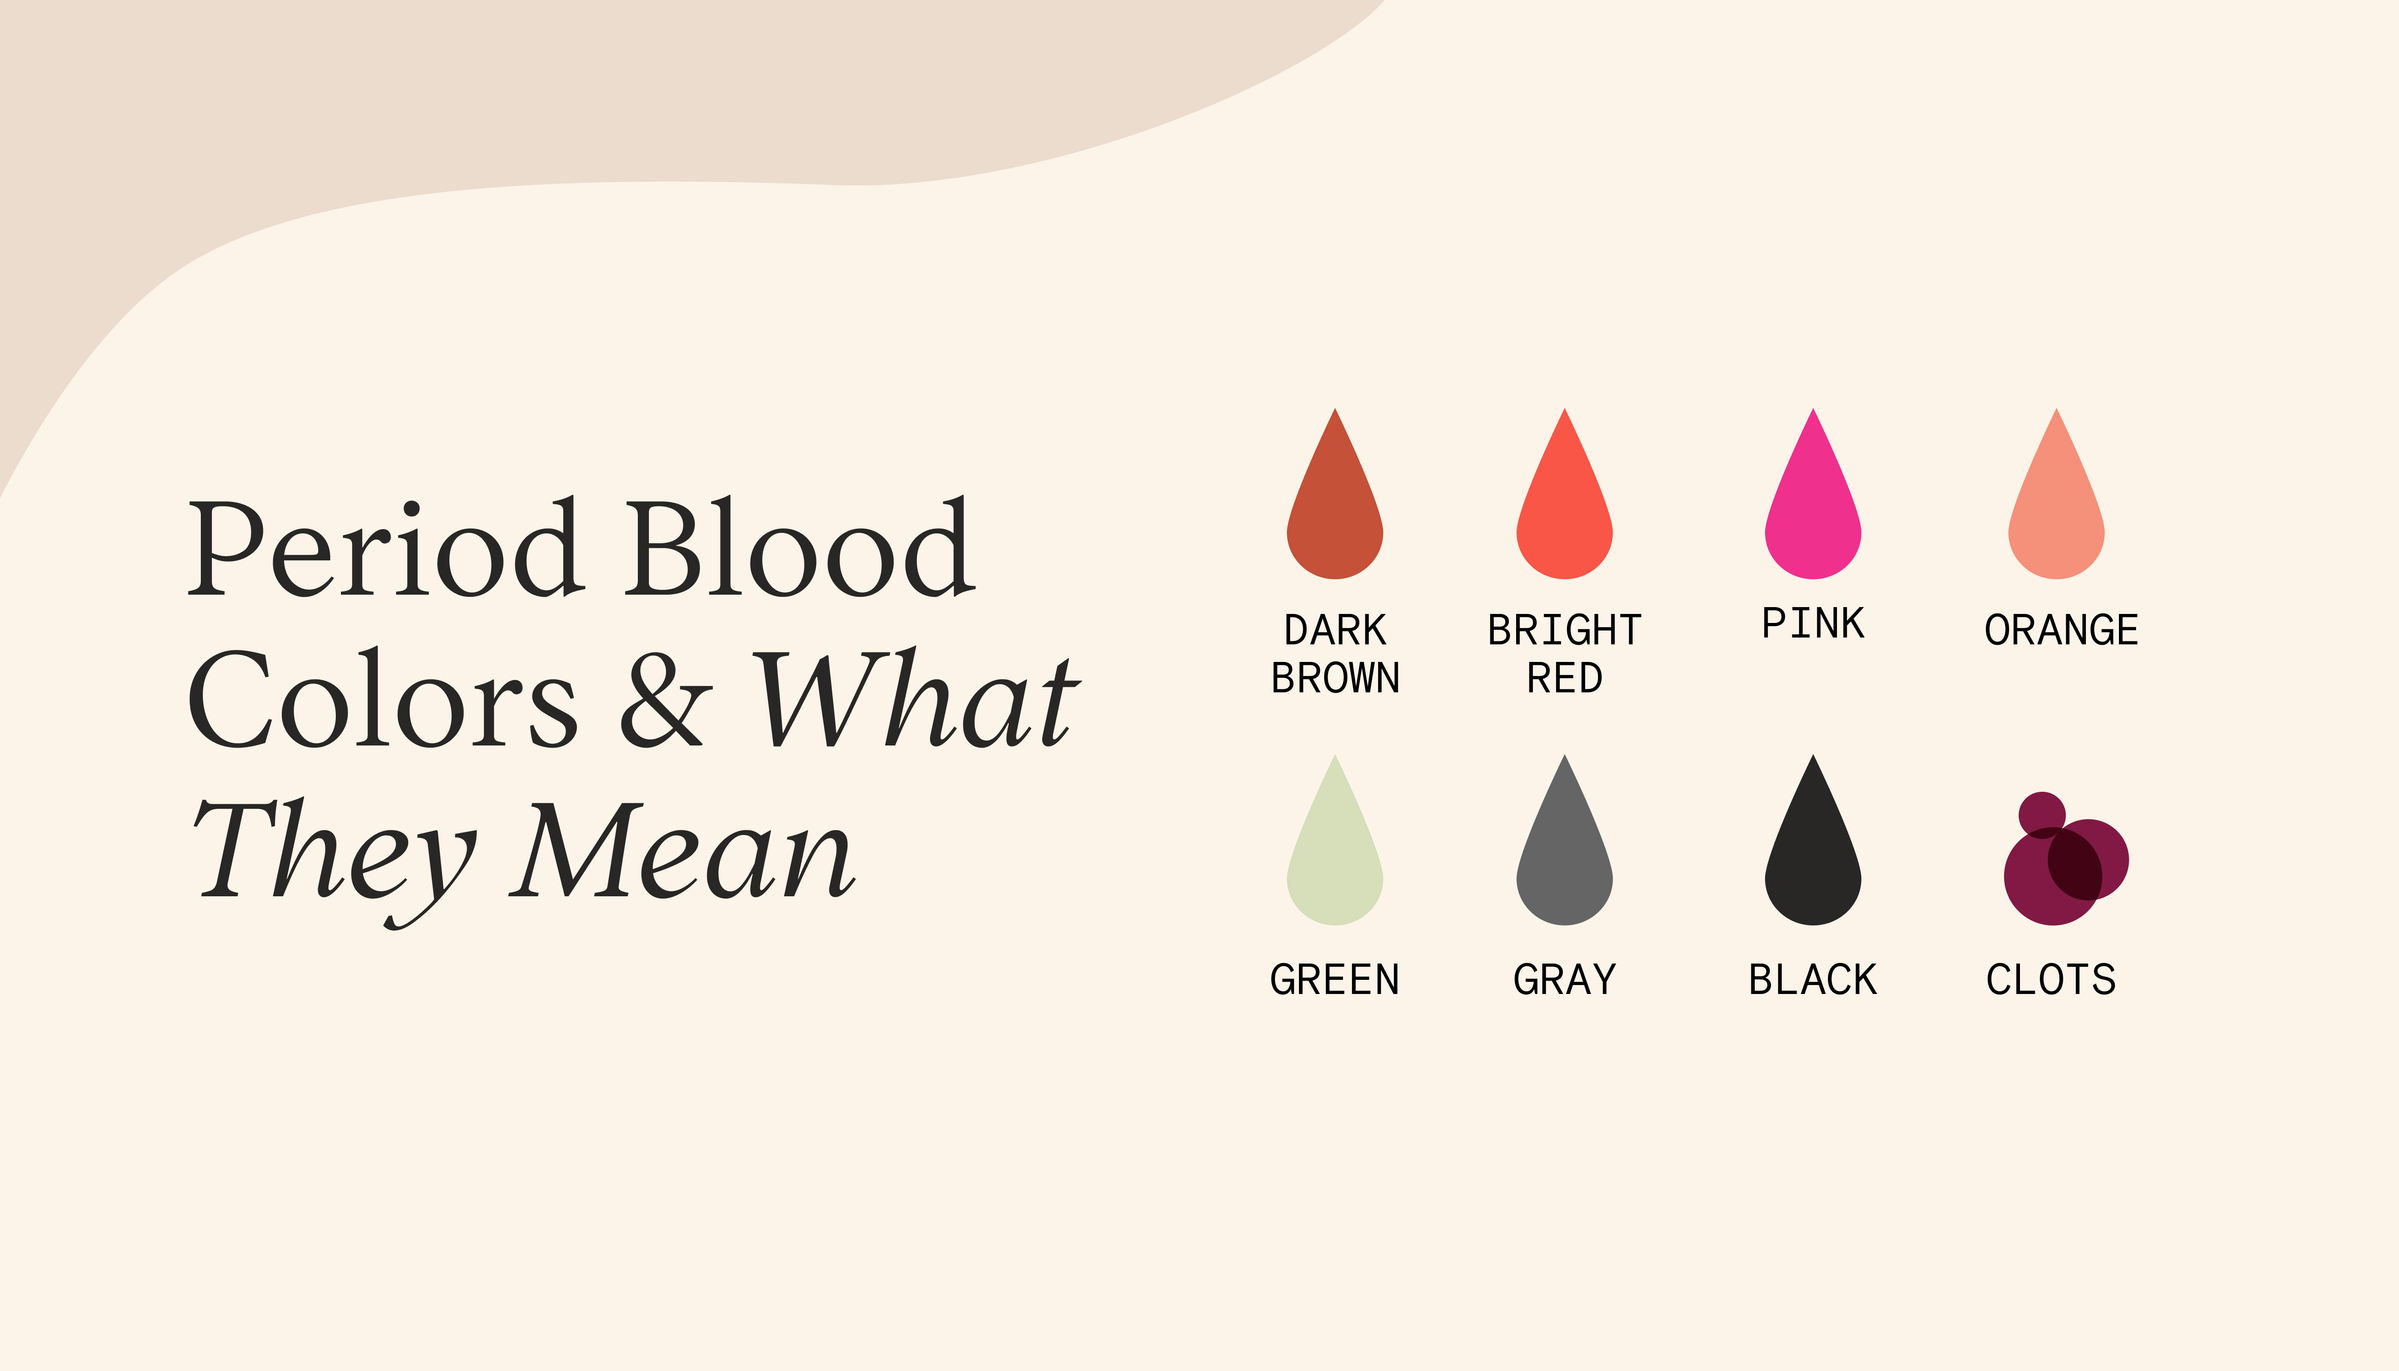 What does brown period blood mean?